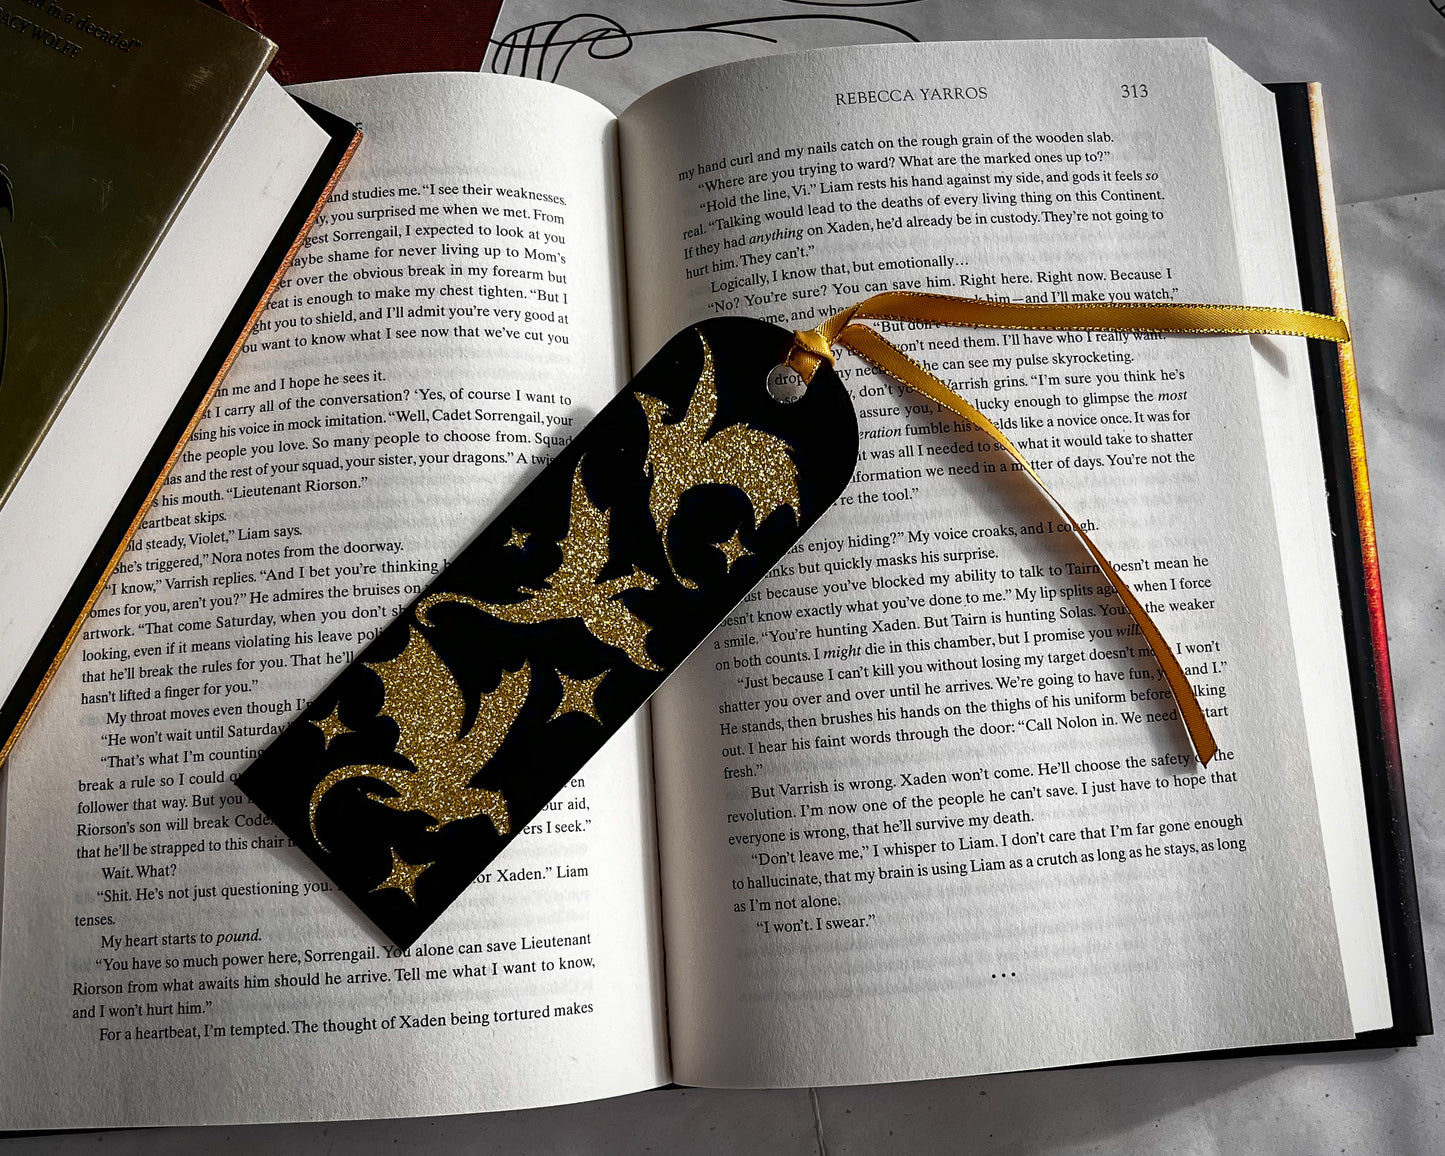 Fourth Wing - Gold Glitter Bookmark - The Empyrean Series